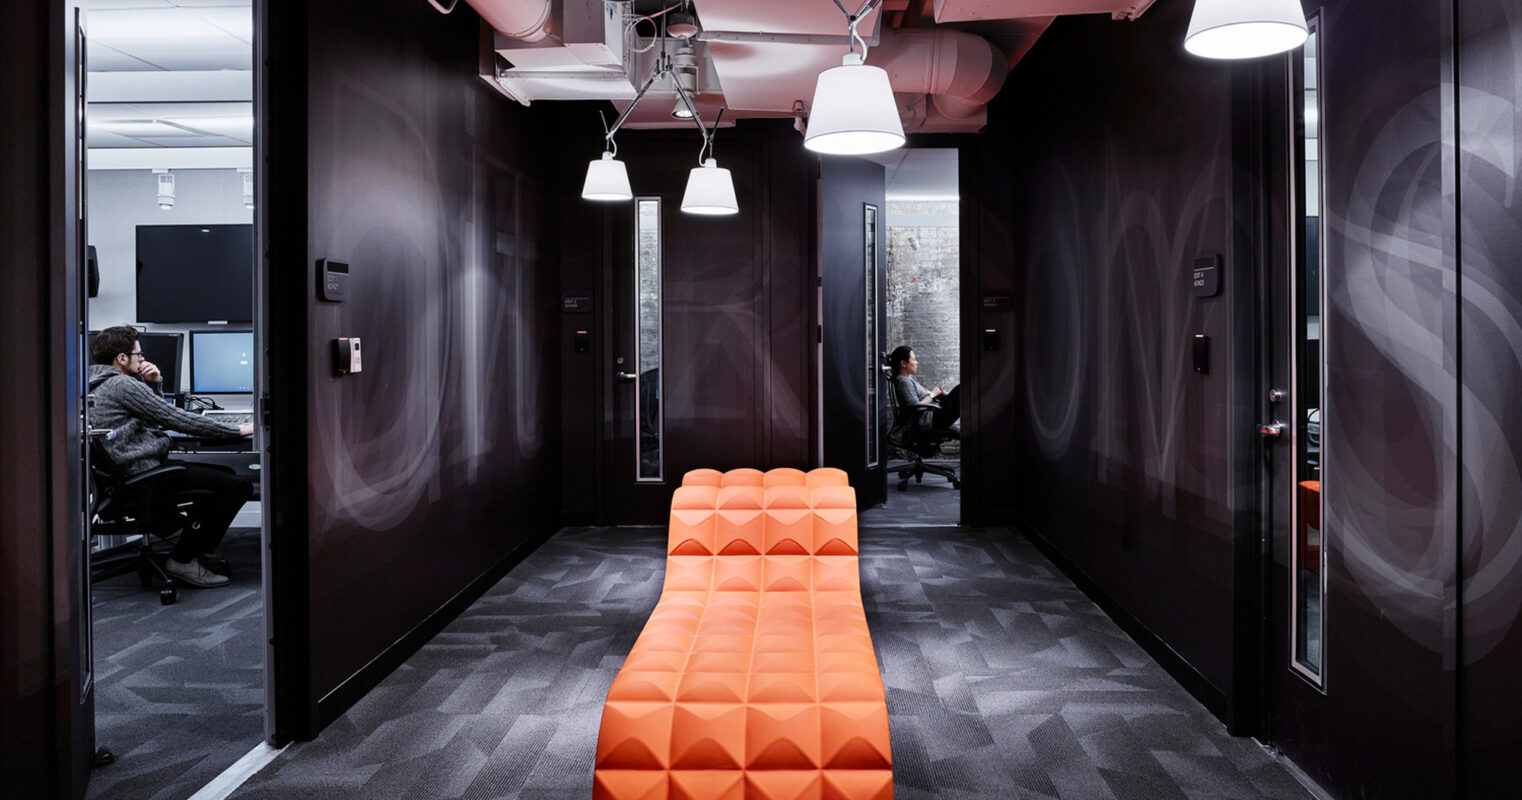 Sleek, modern office hallway featuring geometric patterned carpet, vibrant orange bench with a textured design, contrasting against dark walls and exposed ceiling with angular lighting fixtures.